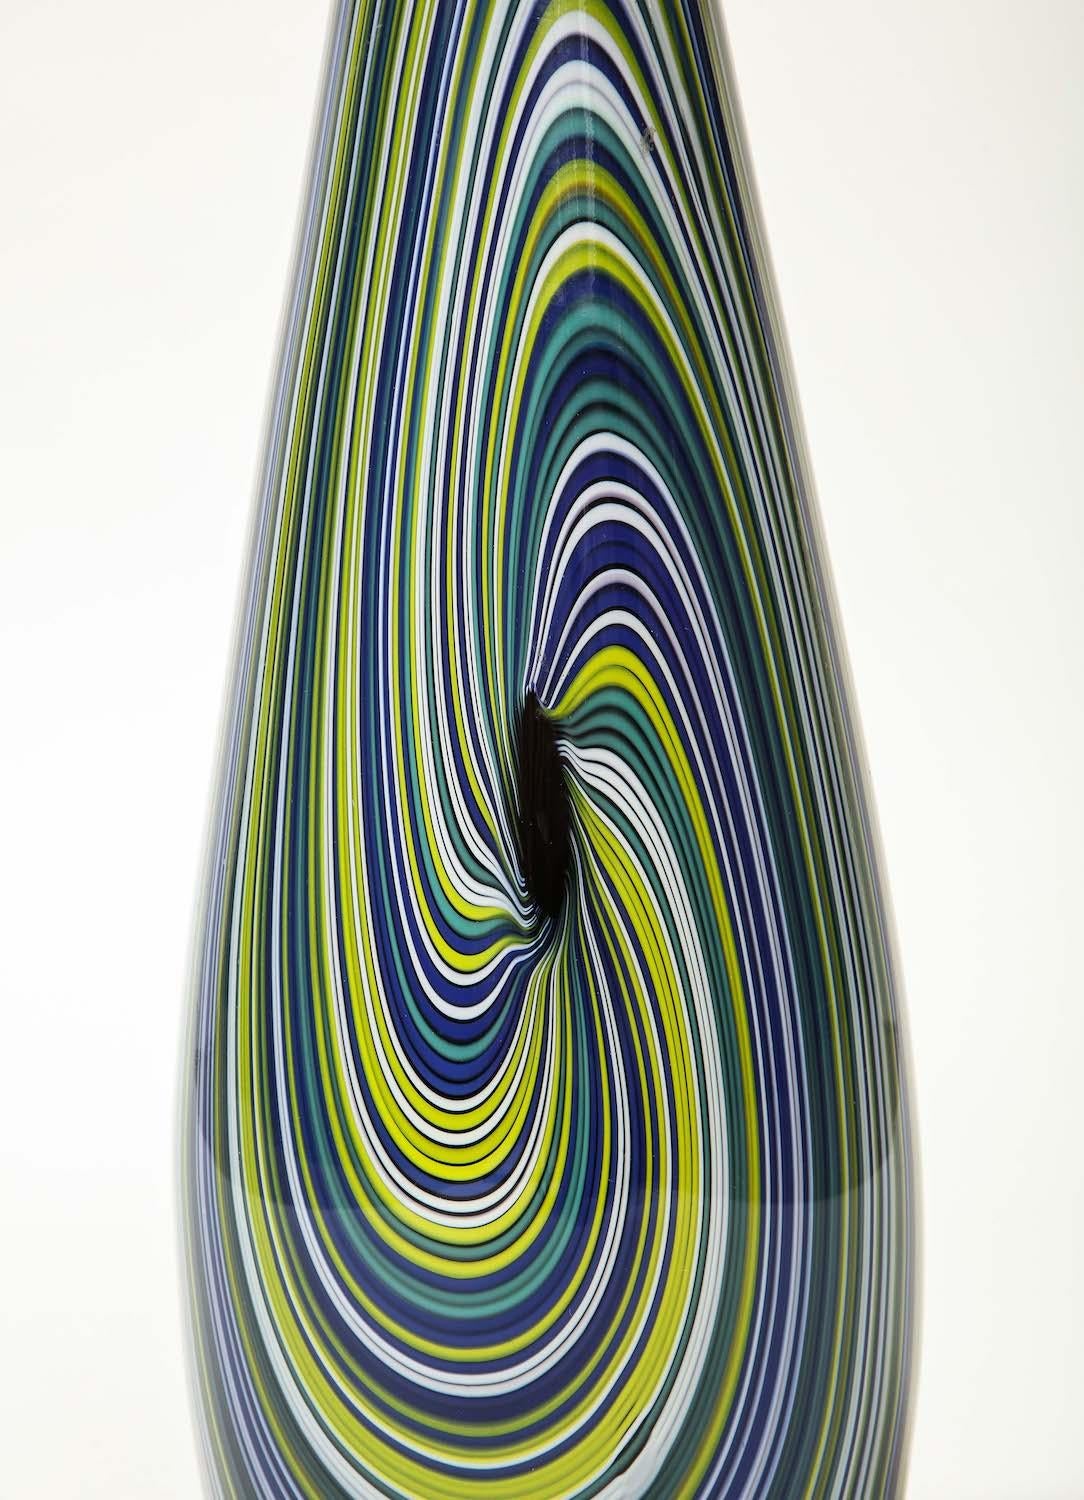 Multi-colored mezza filigrana glass. Signed and numbered underneath. Made in Murano.